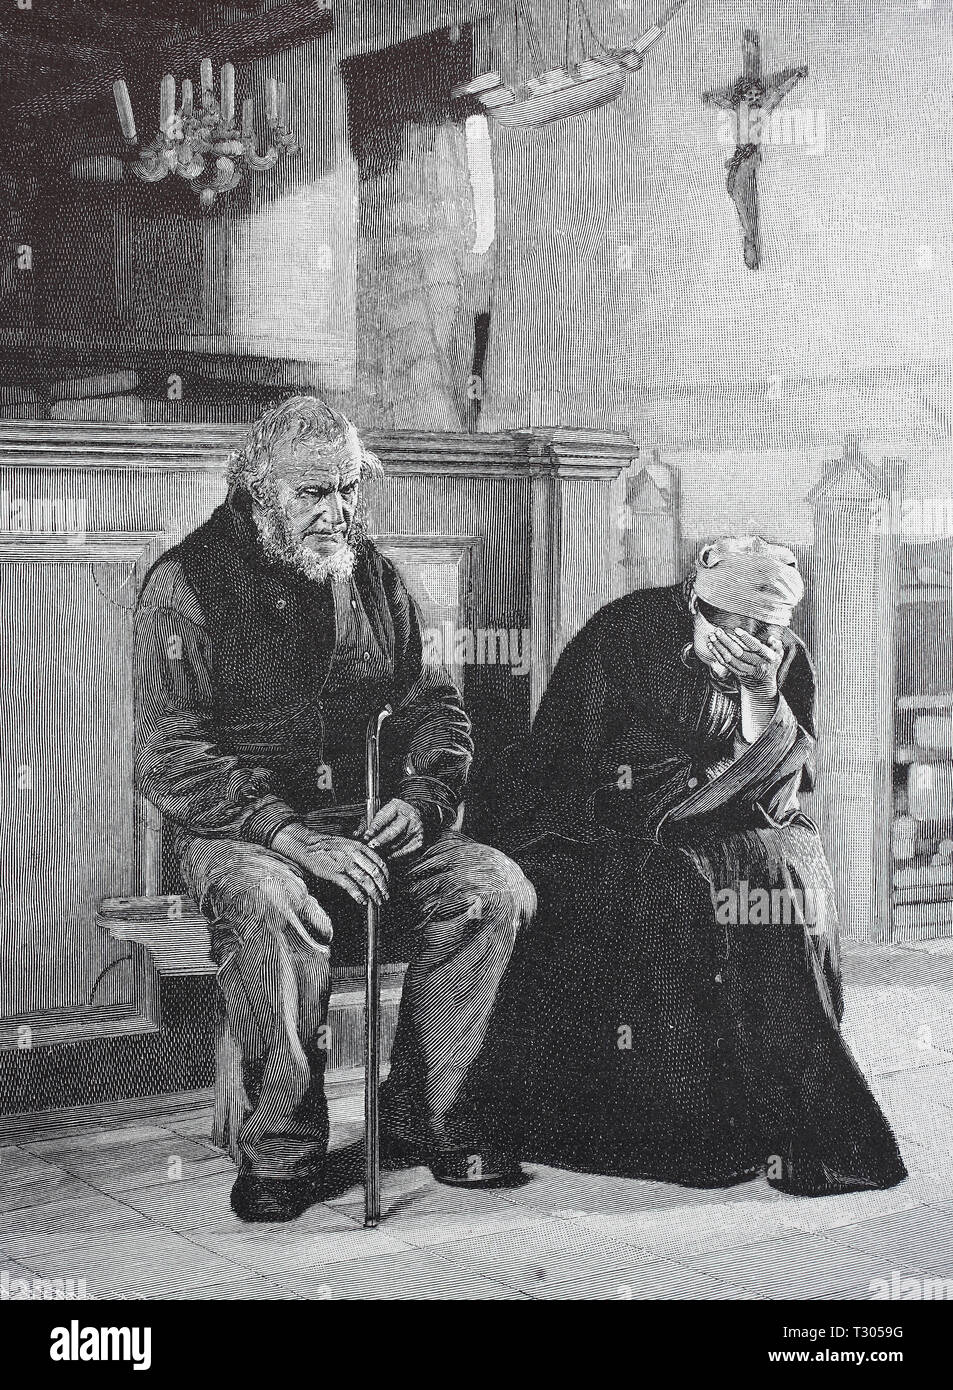 Digital improved reproduction, Sadly missed by, two mourning old people in the church, In tiefer Trauer, zwei trauernde alte Menschen in der Kirche, from an original print from the 19th century Stock Photo